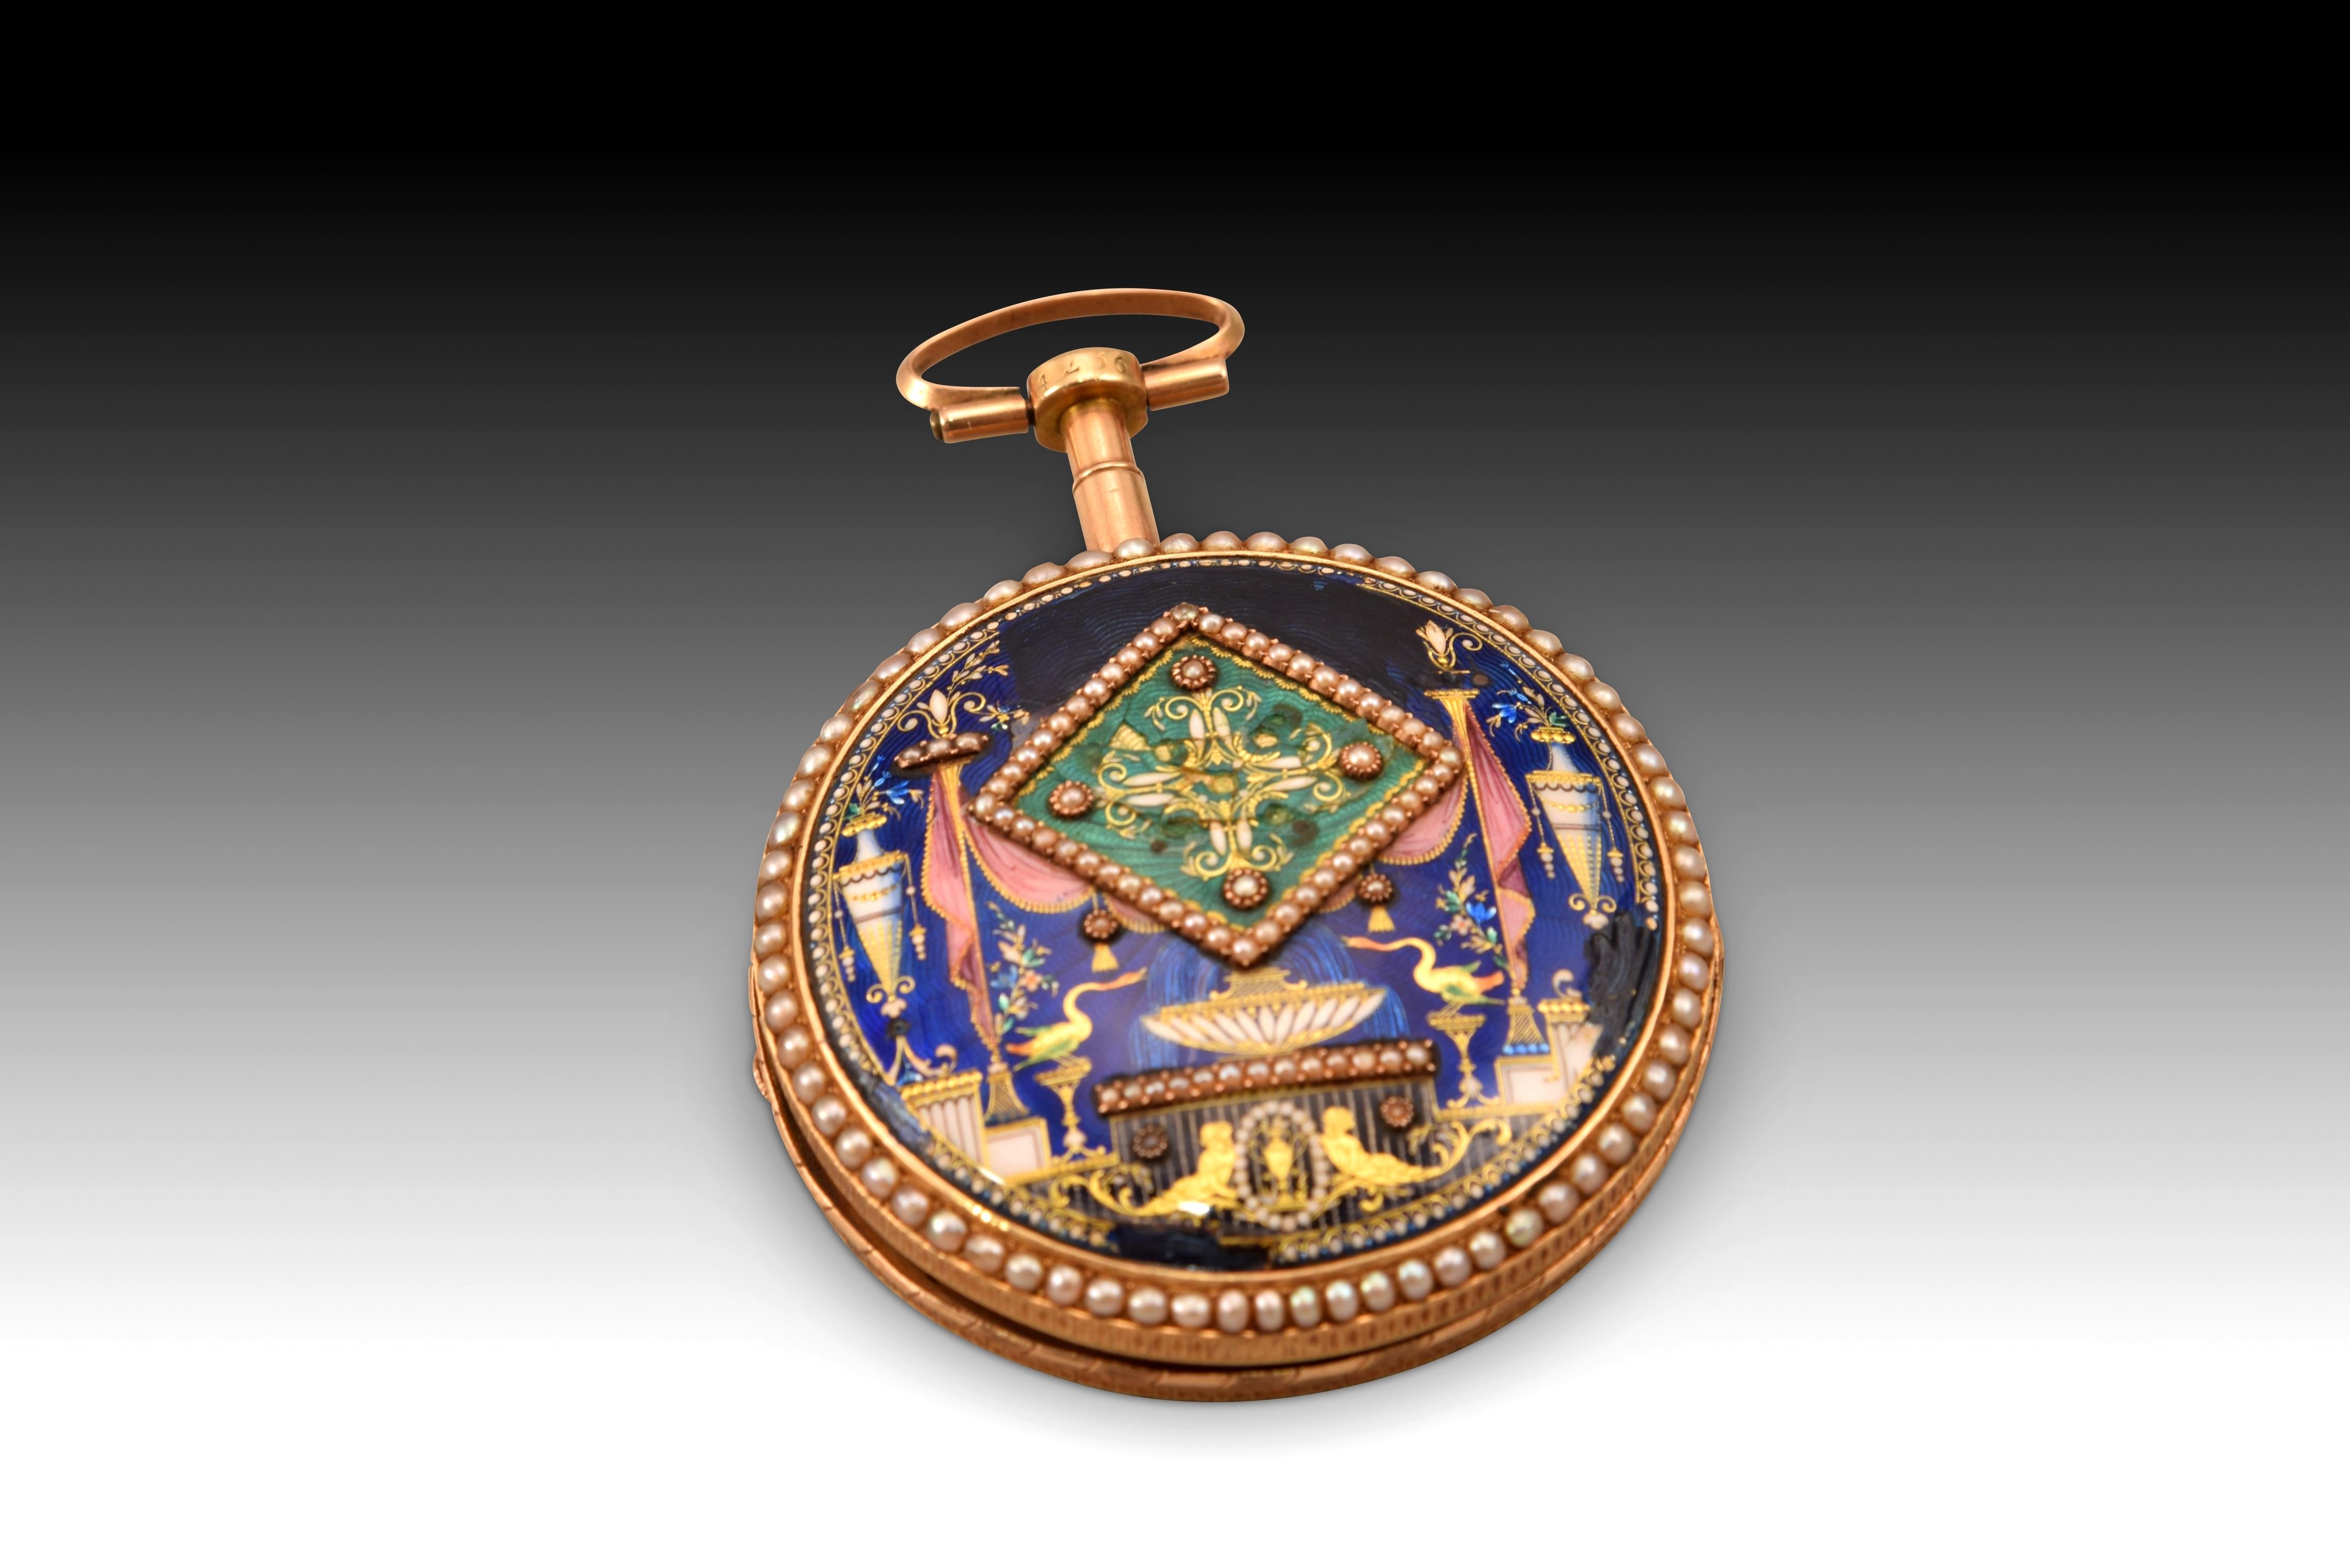 18th Century Pocket Watch, Jaqs Blanc, Gold, Enamel, Etc. Possibly ca Late 18th C For Sale